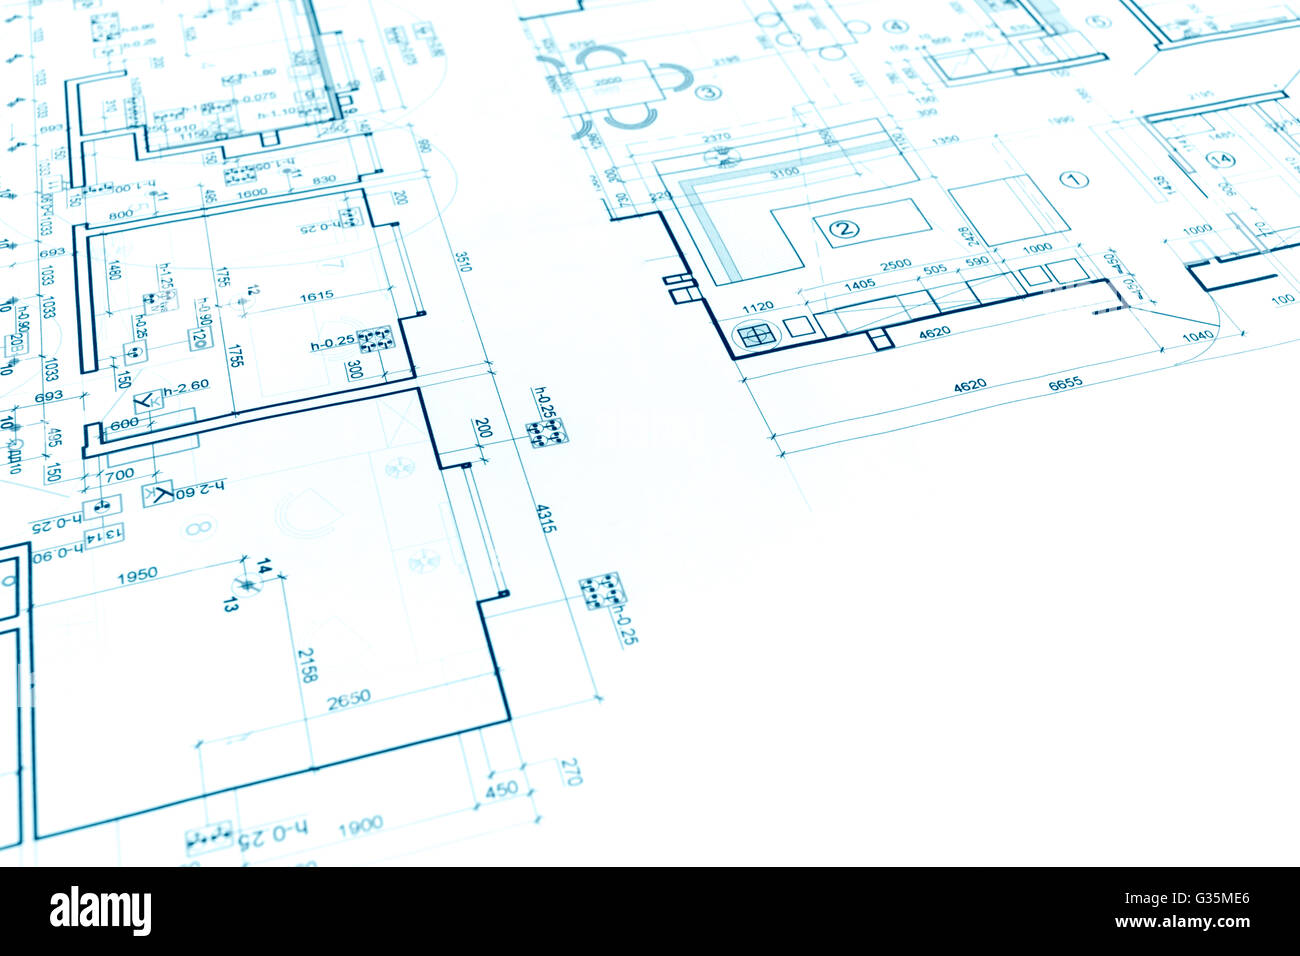 floor plan project, technical drawing, construction blueprint background Stock Photo